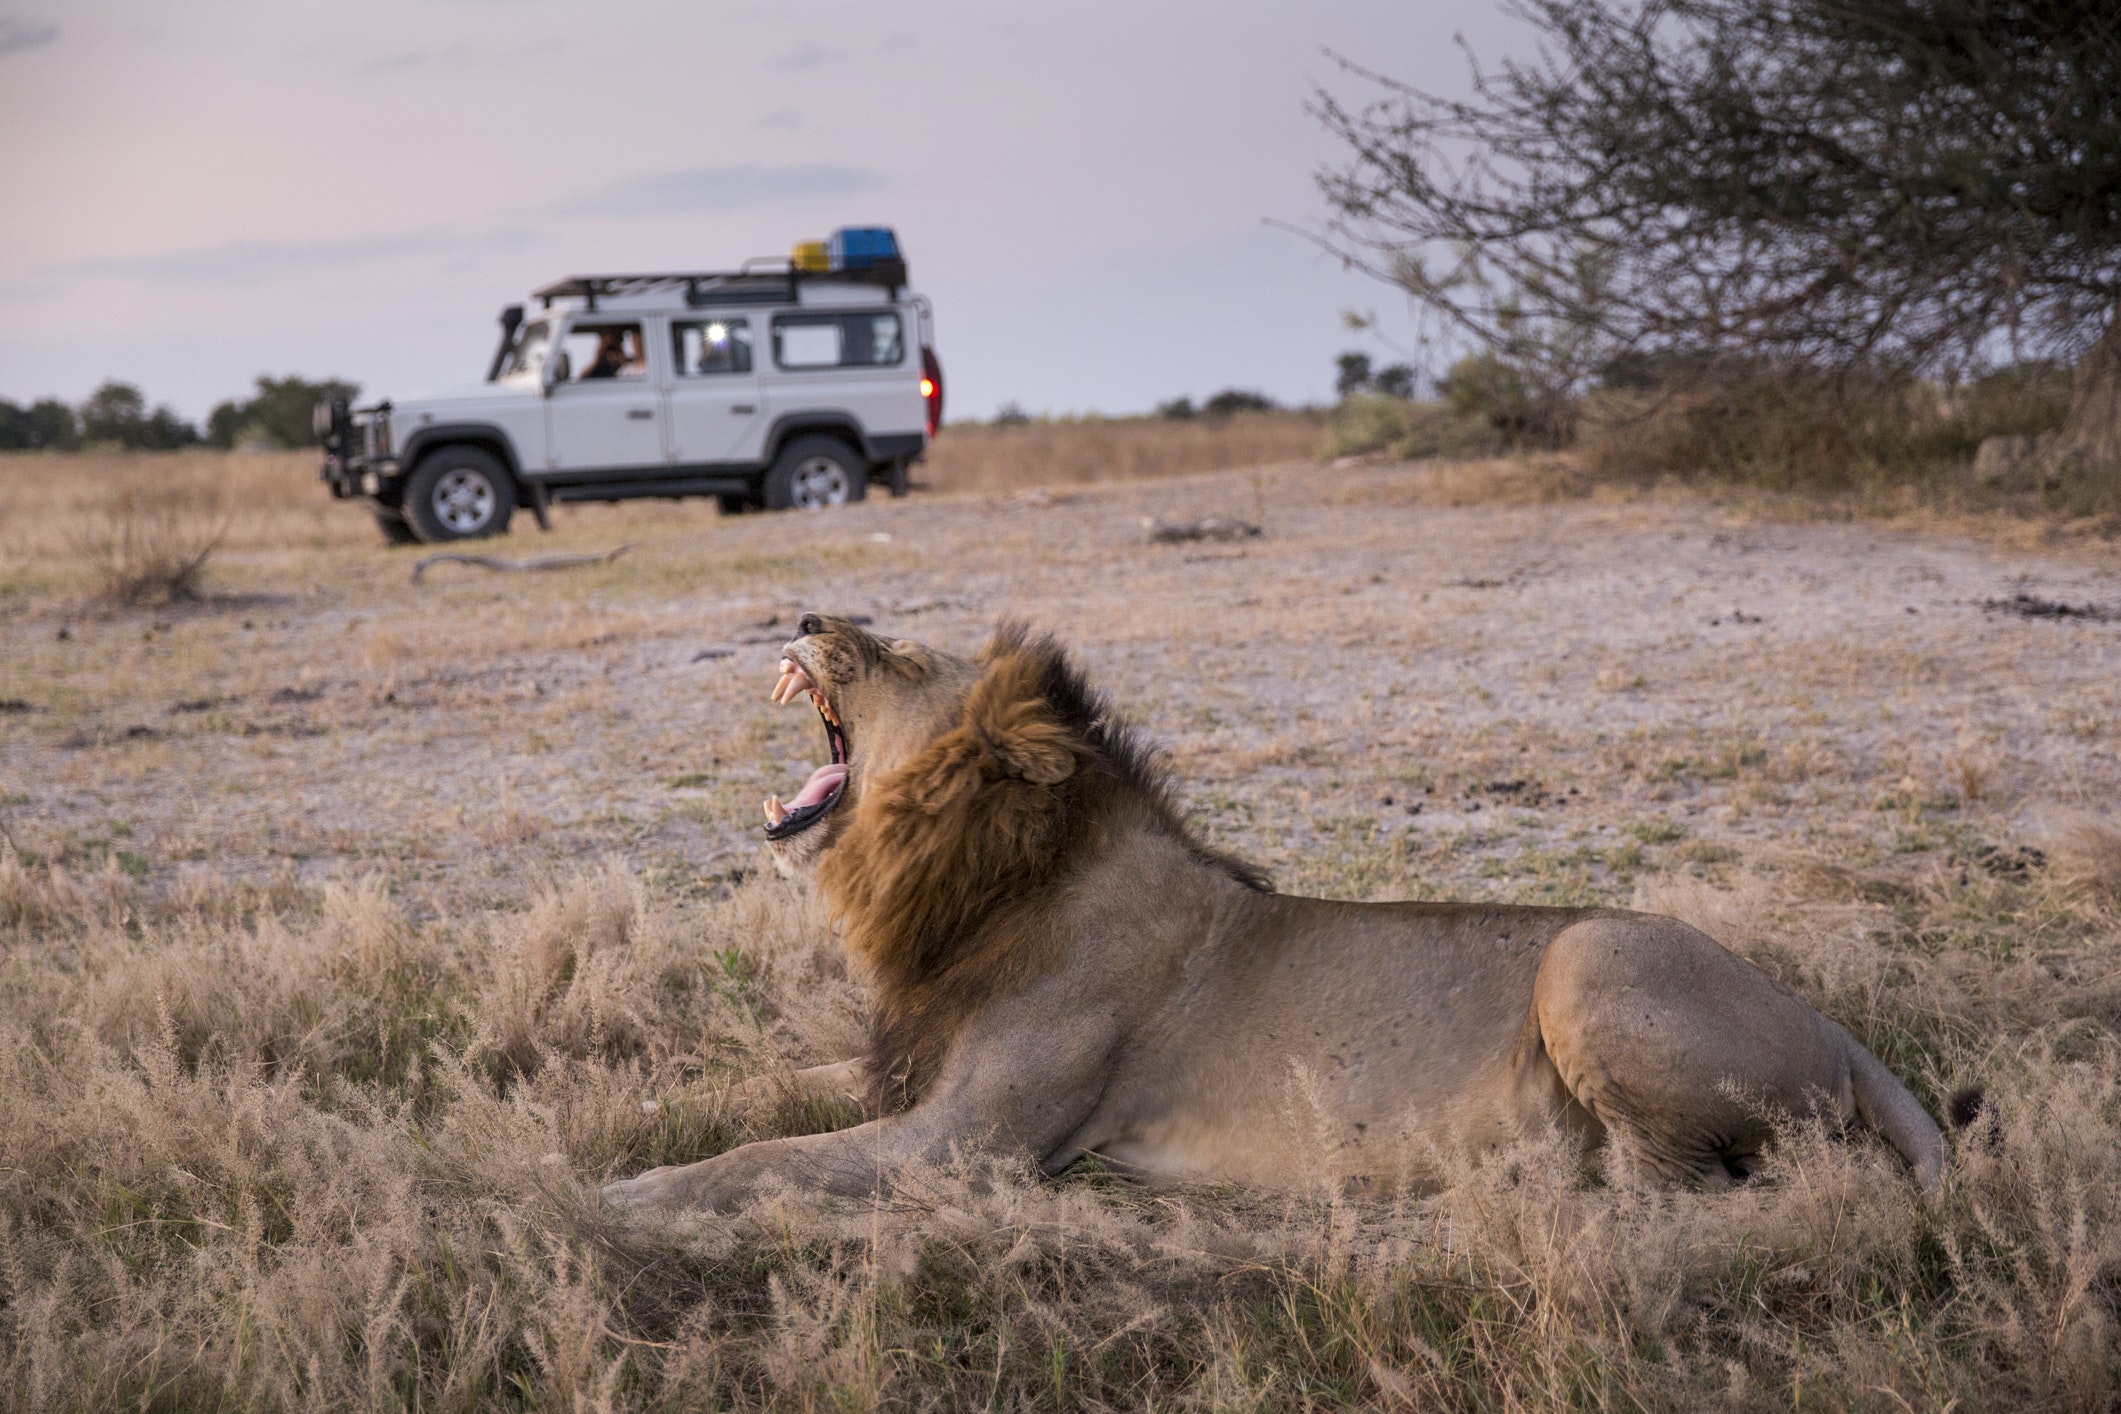 Tourists in Land Rover approach resting Lion (Panthera leo) at dusk at the Moremi Game Reserve, Botswana